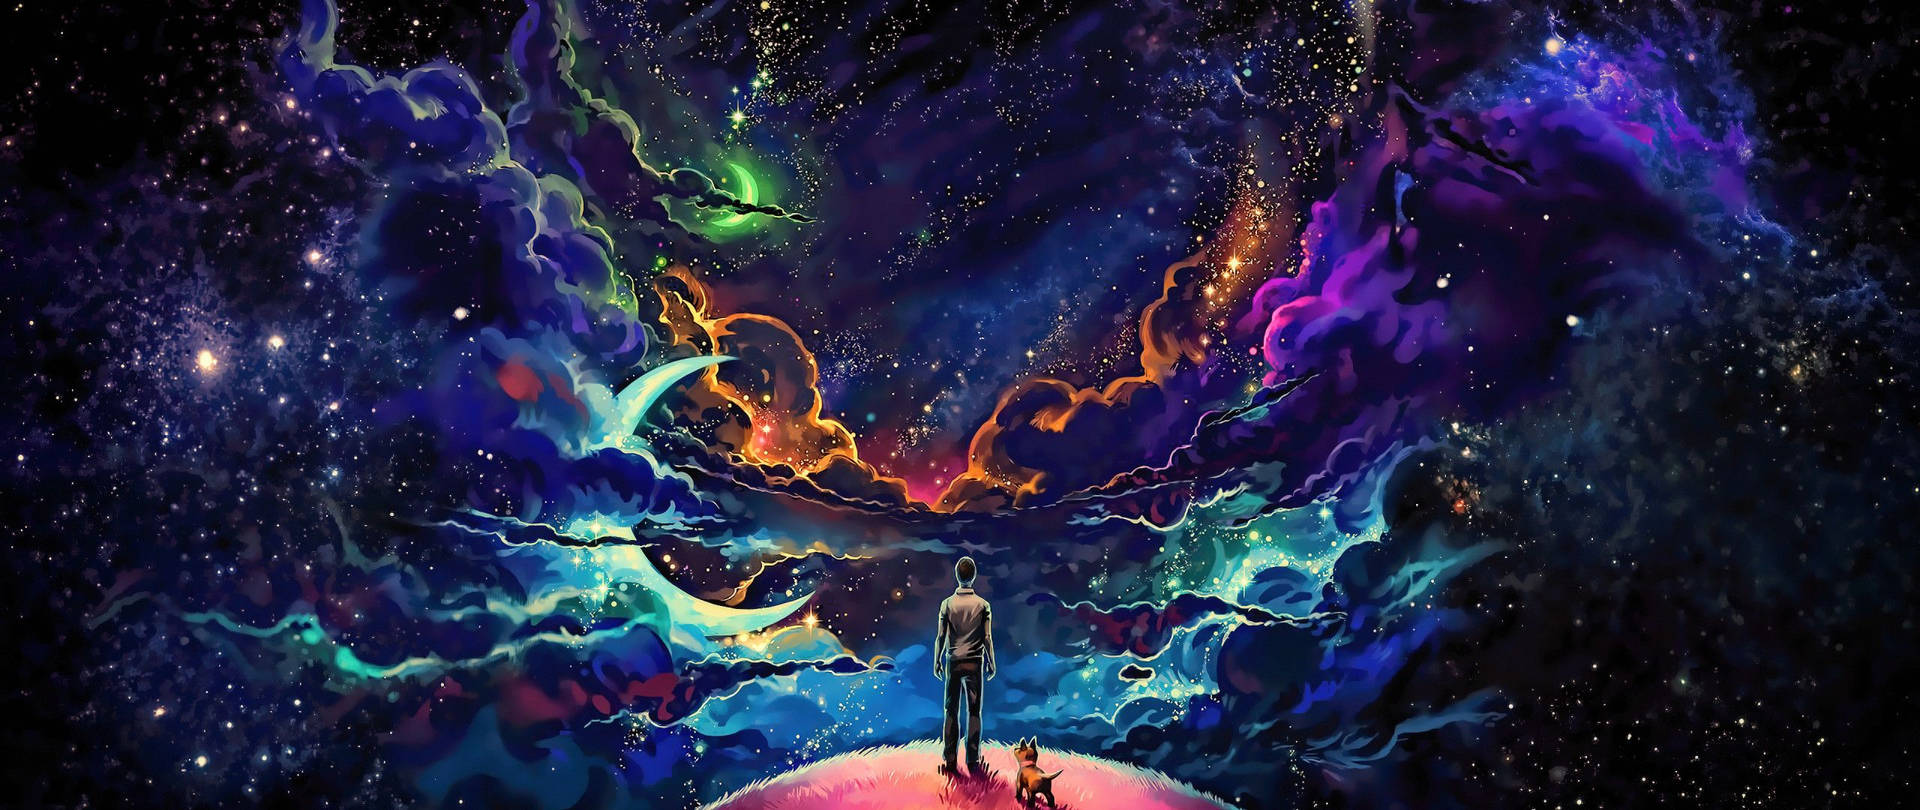 Stunning Animated Man in a Galaxy Wallpaper